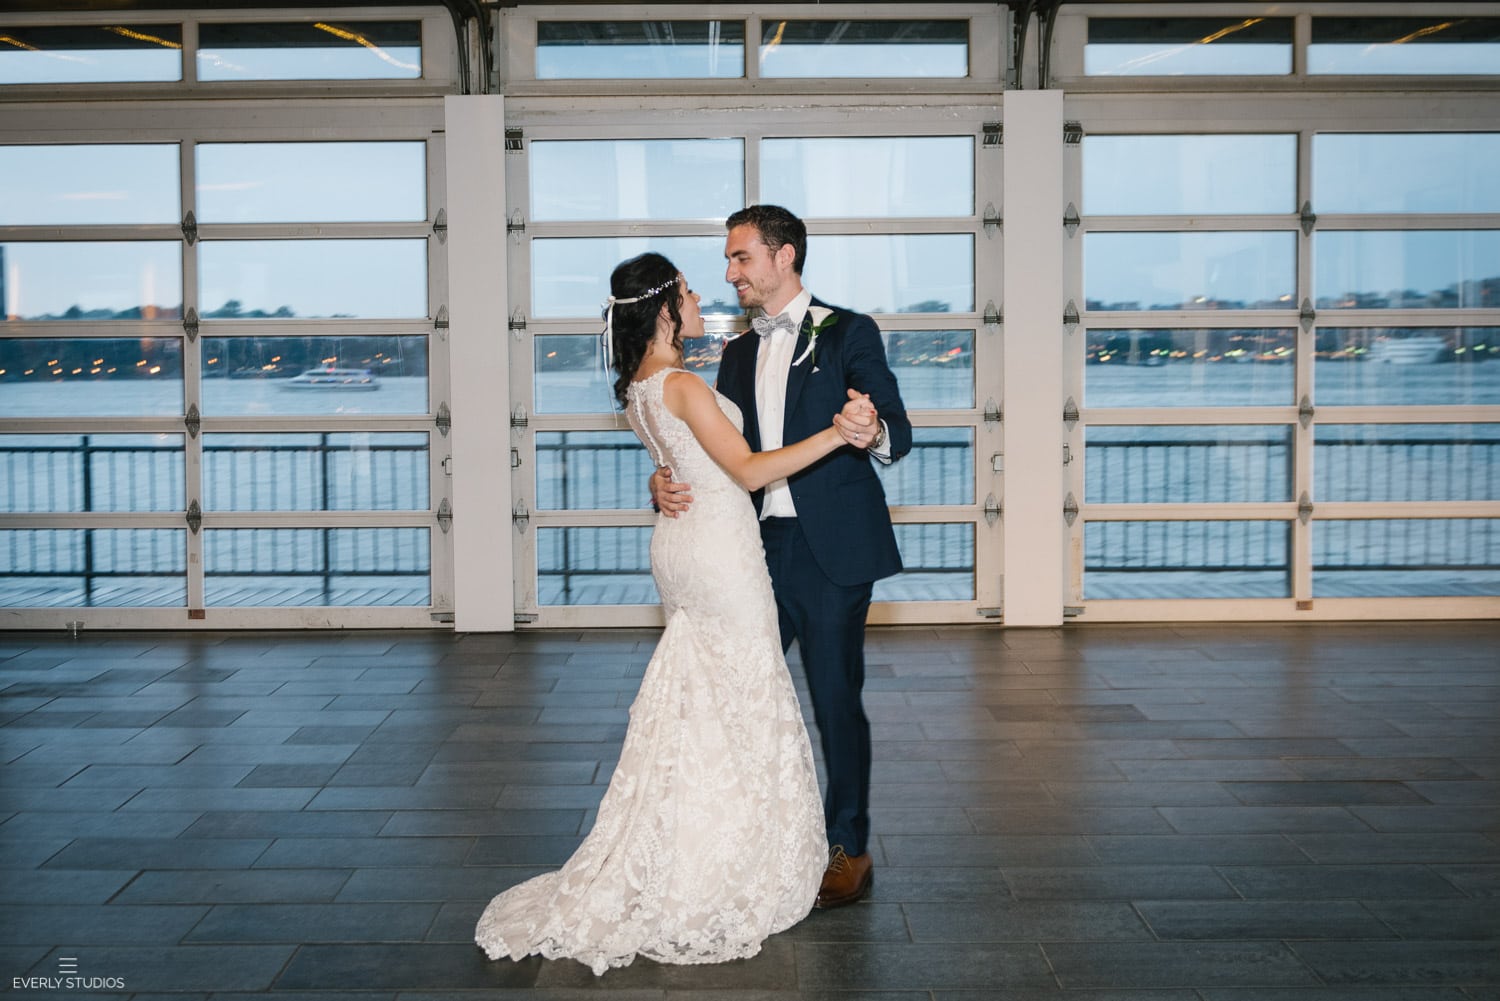 Chelsea Piers Sunset Terrace wedding reception in NYC